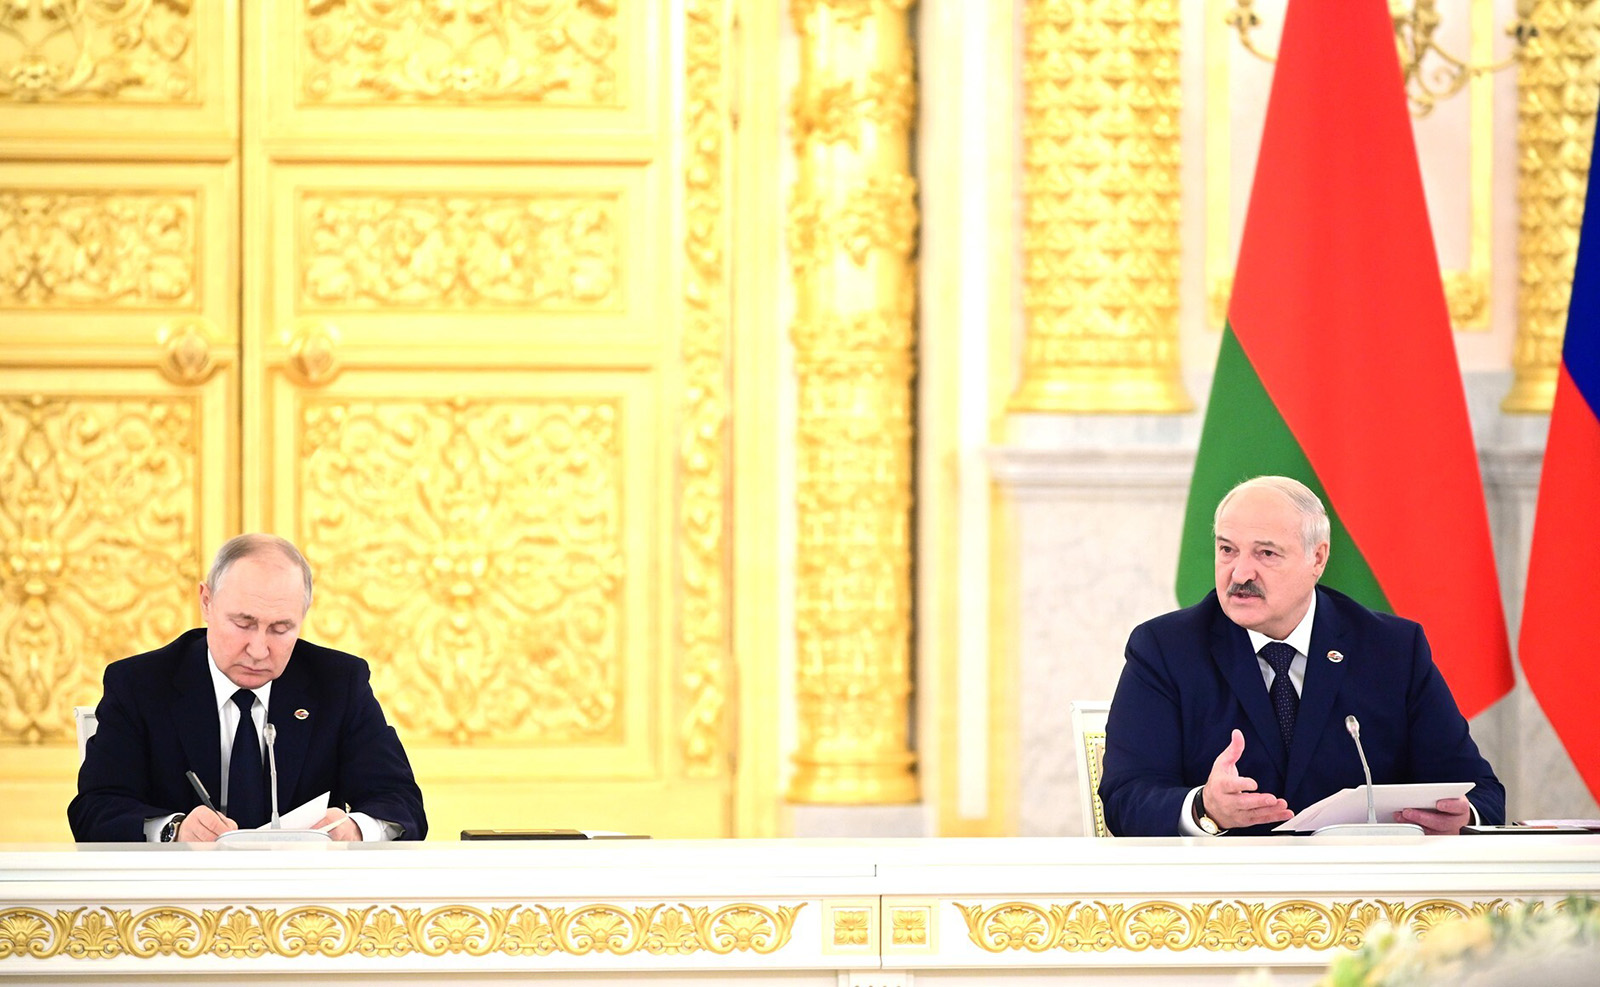 Russian President Vladimir Putin, left, and Belarusian President Alexander Lukashenko, right, attend the Russia-Belarus Union State Supreme Council at Kremlin Palace in Moscow, Russia, on April 6.